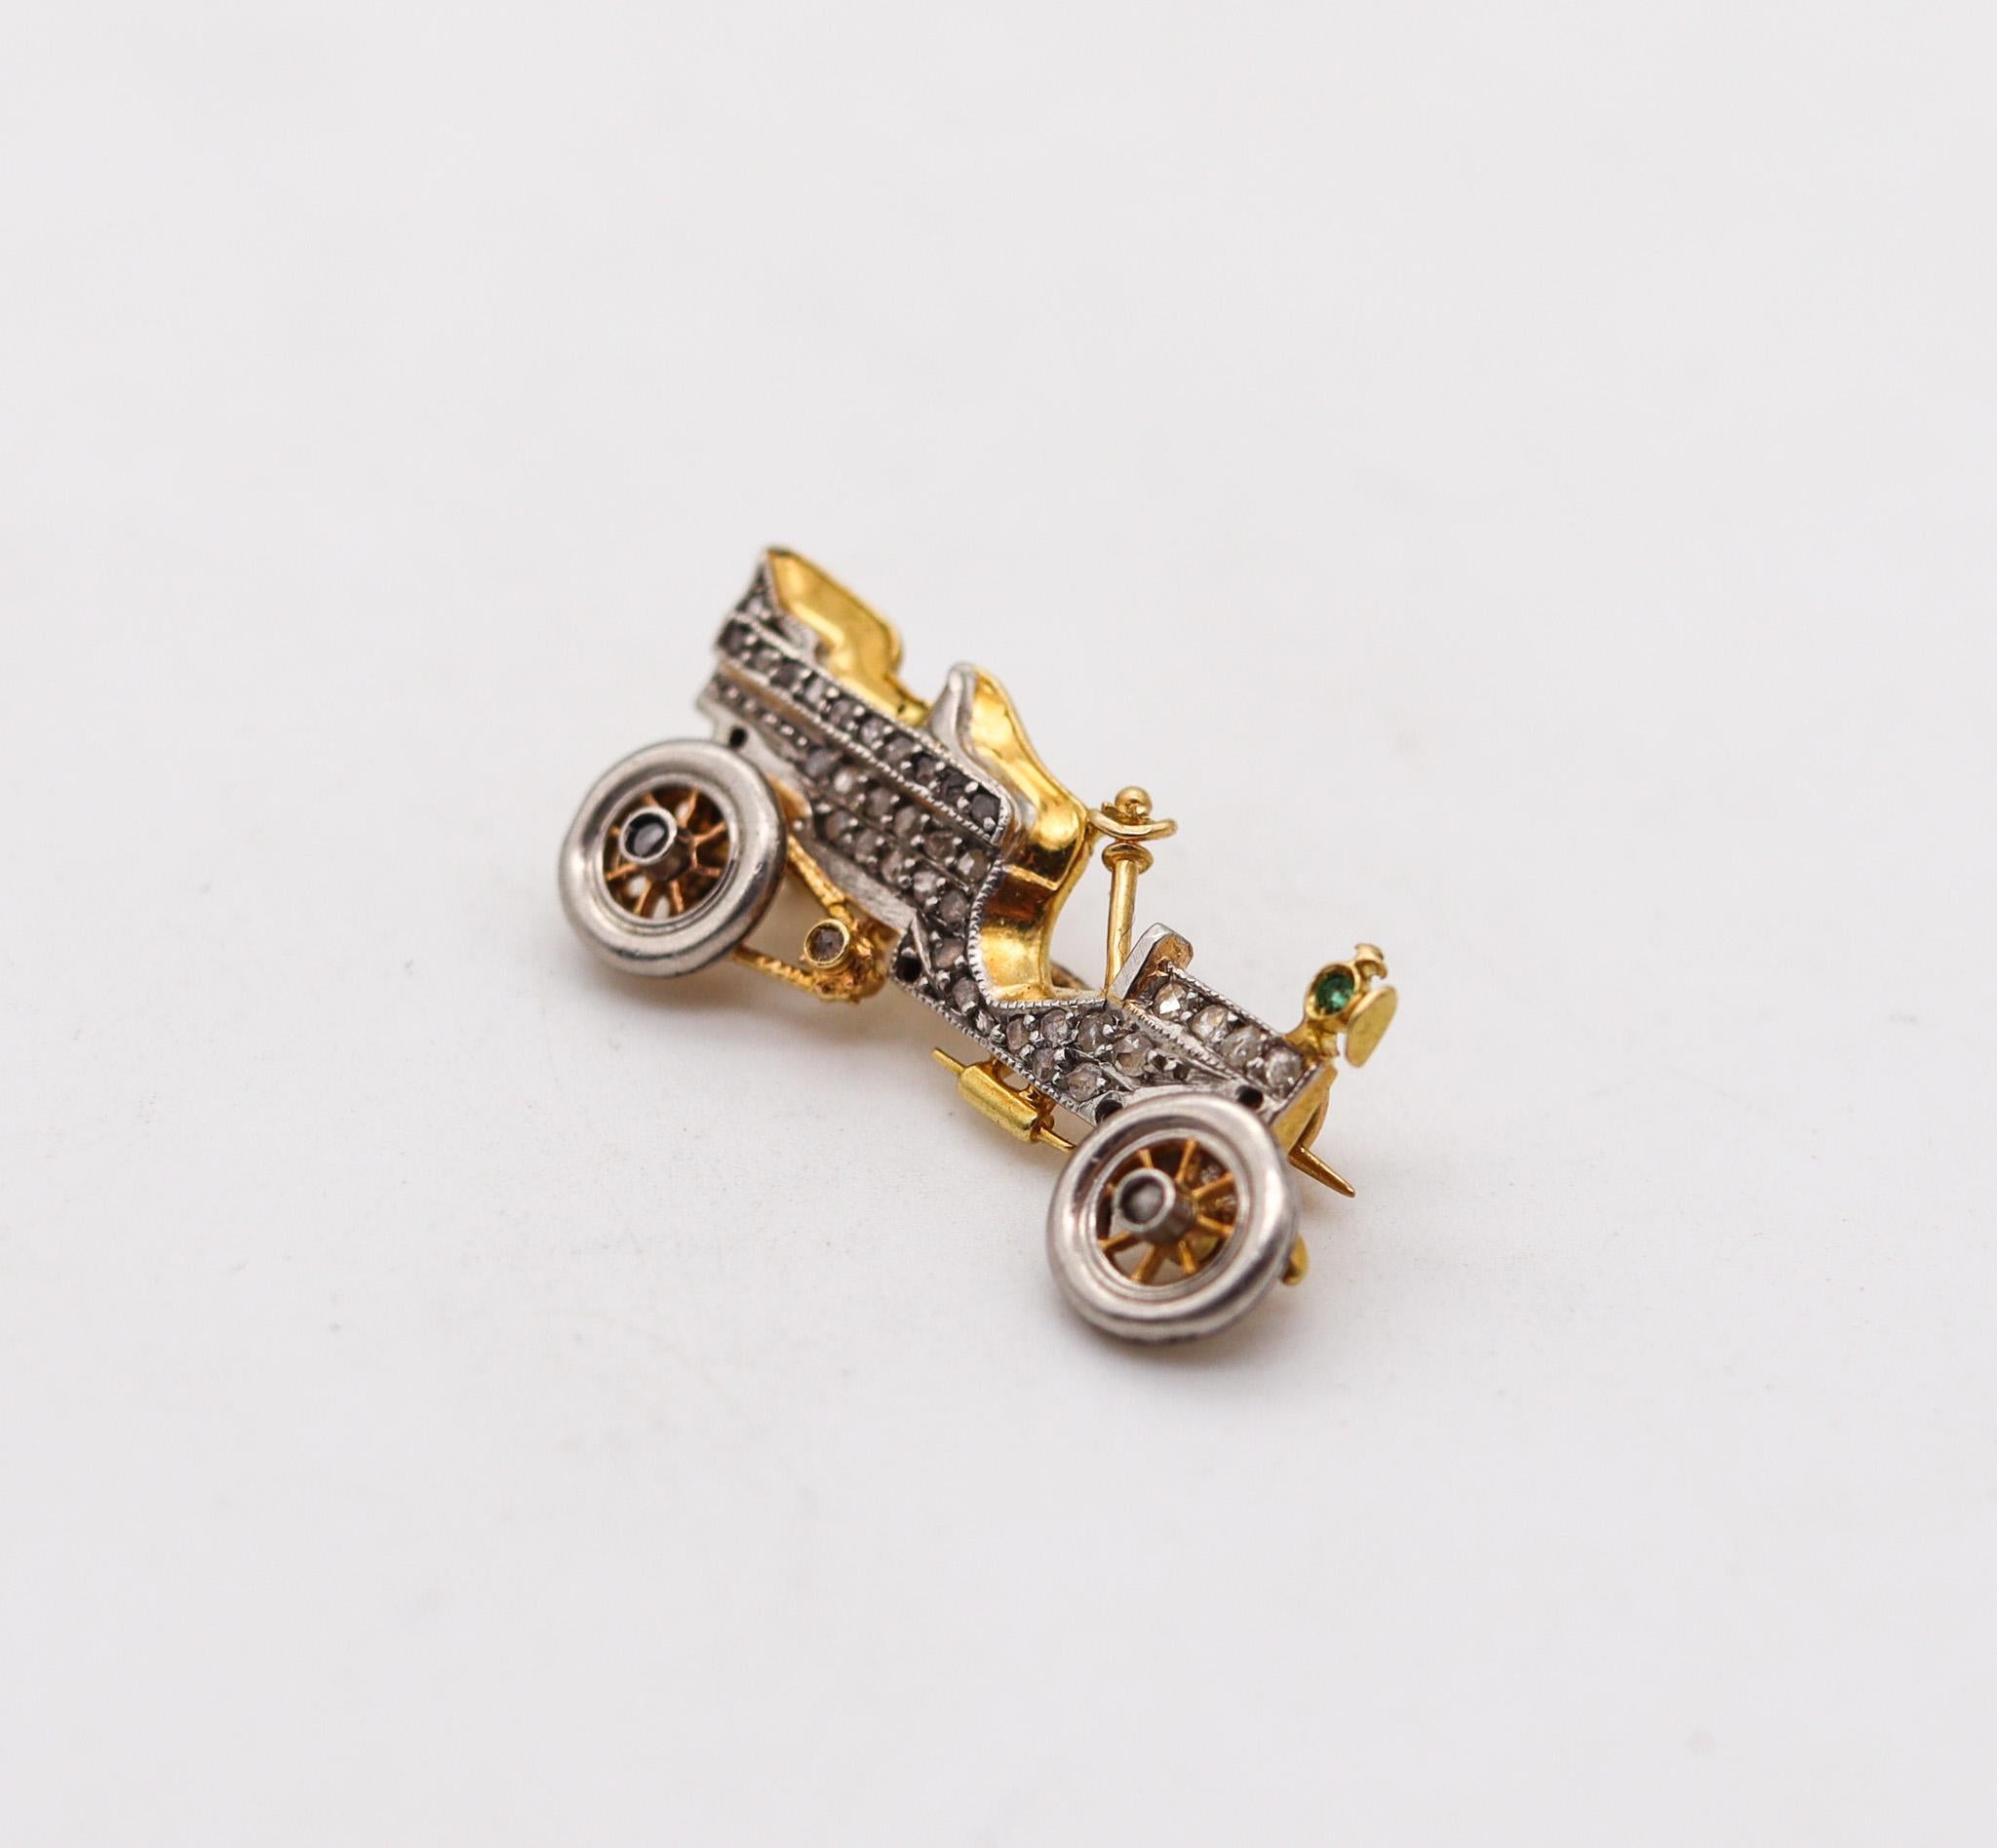 Art Deco car brooch with gemstones.

Beautiful antique car miniature brooch, created in America during the art deco period, back in the 1925. This little piece has been crafted with excellent details in solid yellow gold of 18 karats and parts in